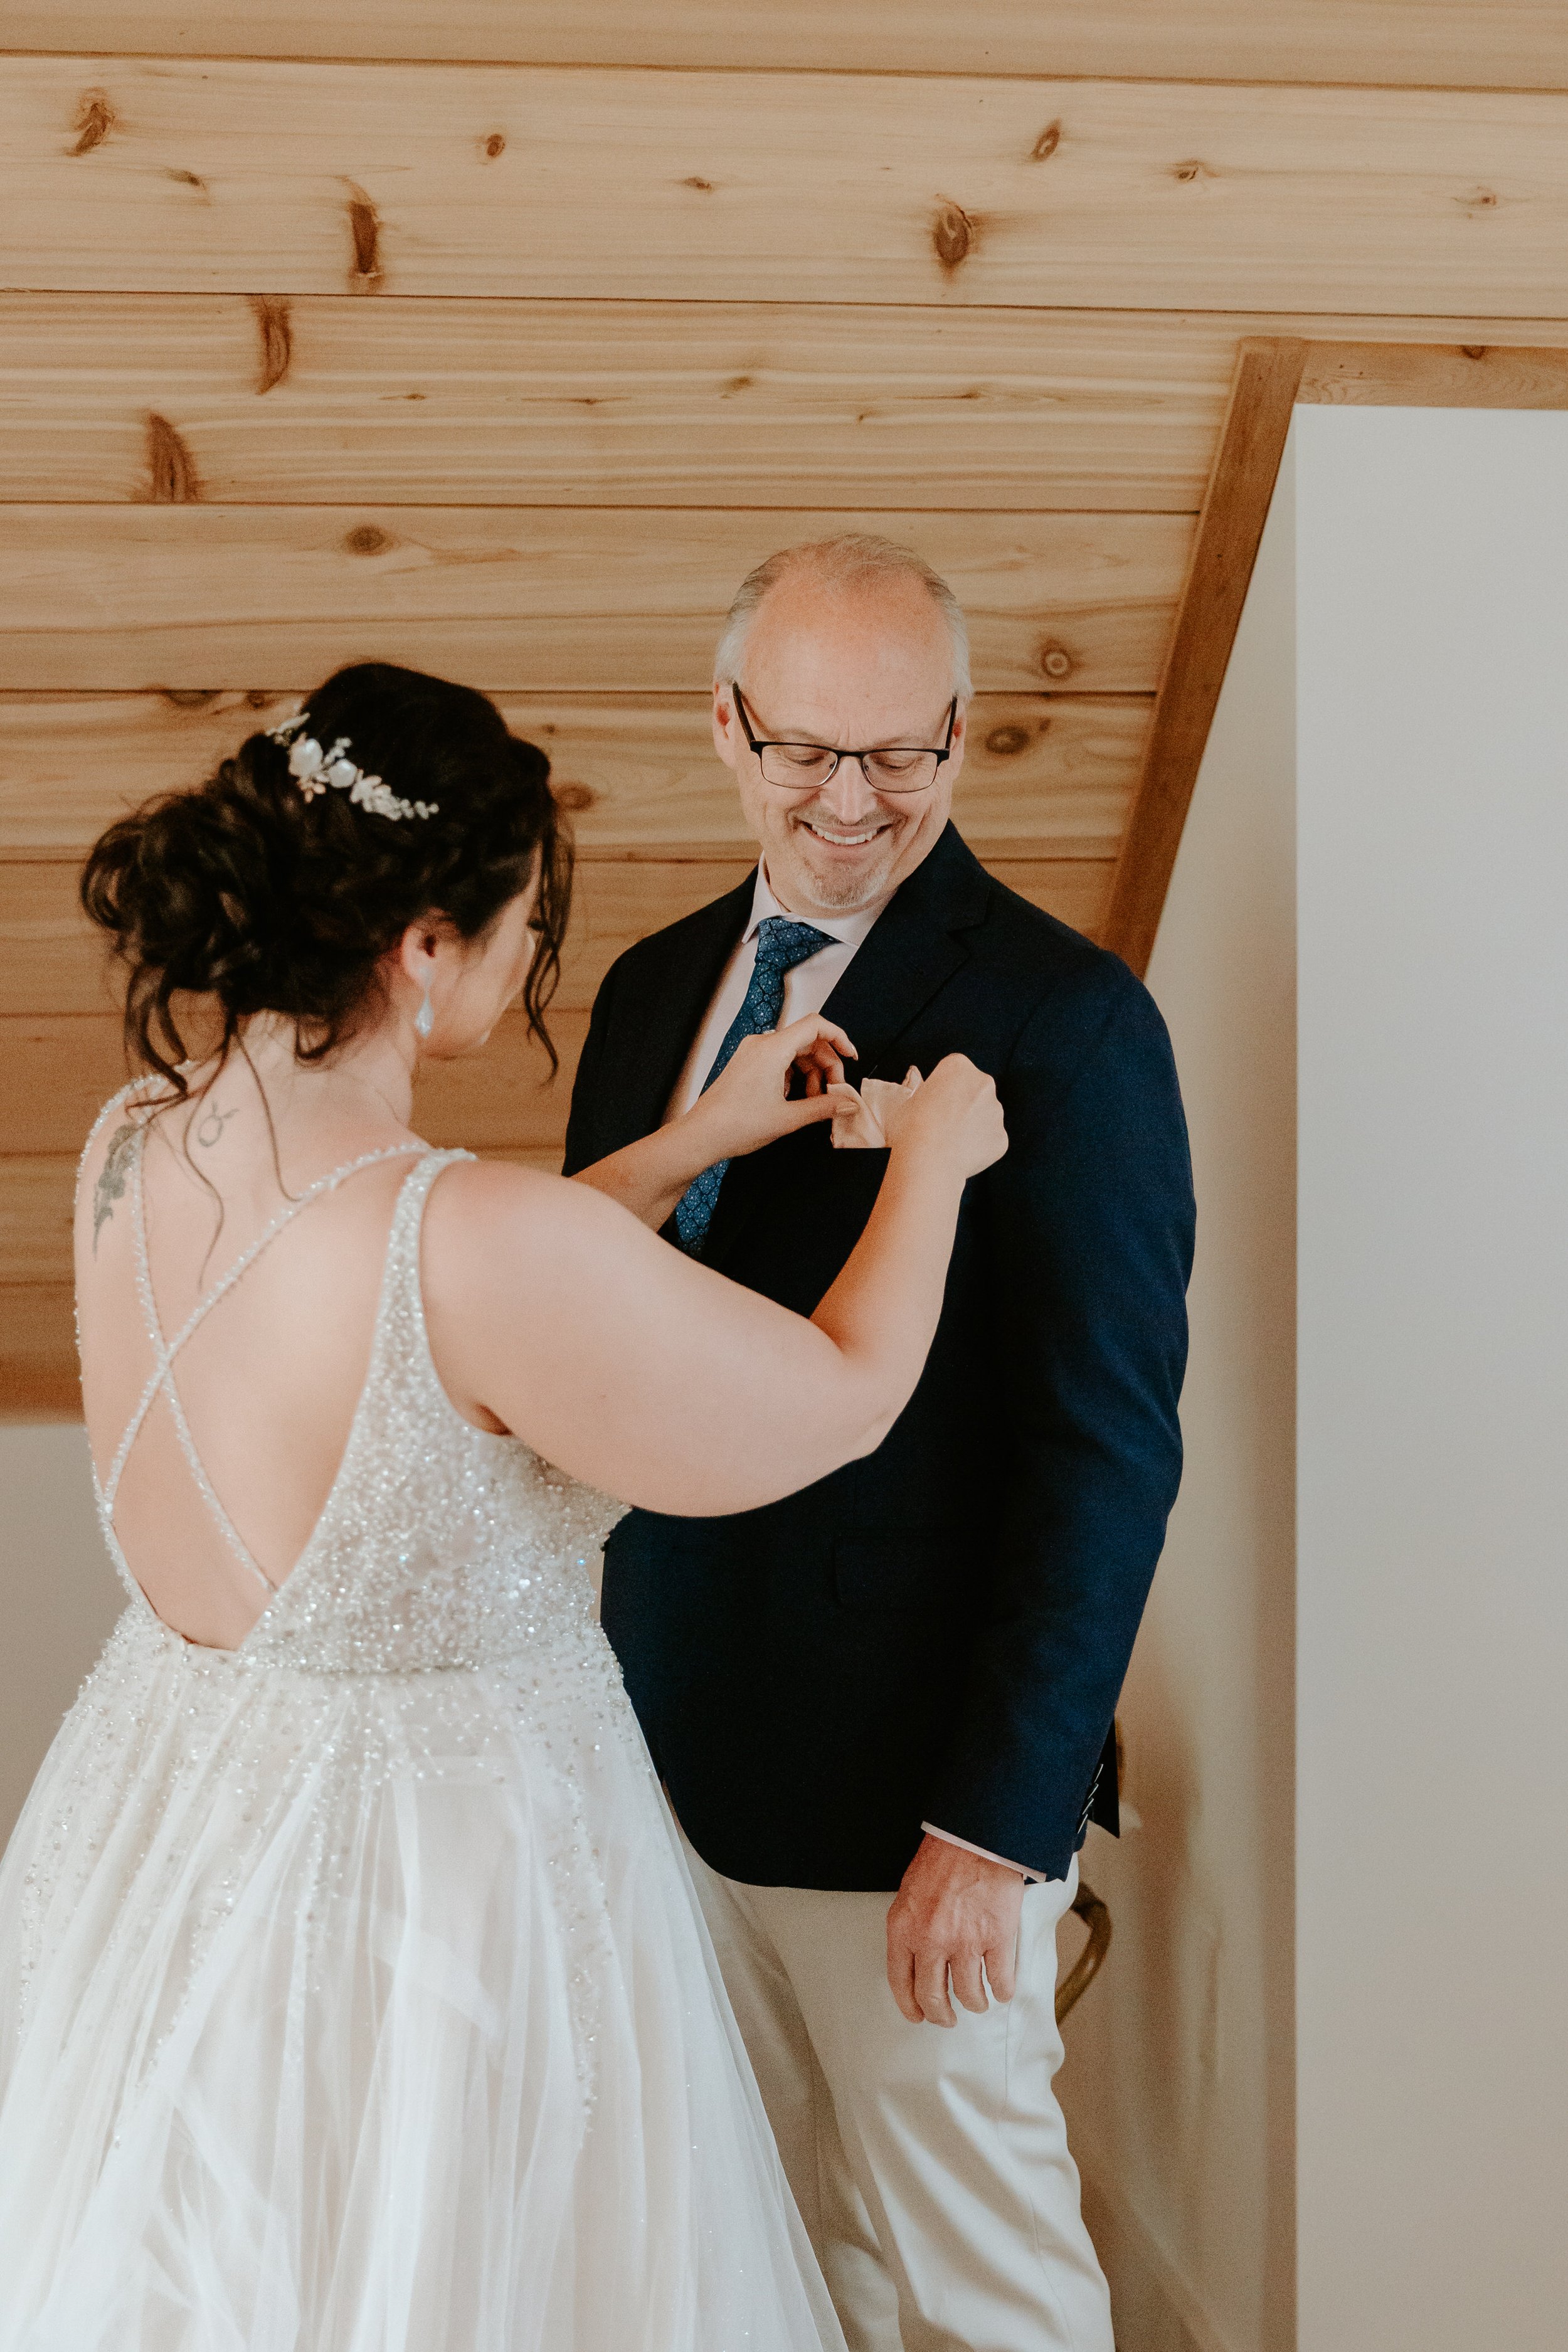 Woman fixes her dad's pocket square.